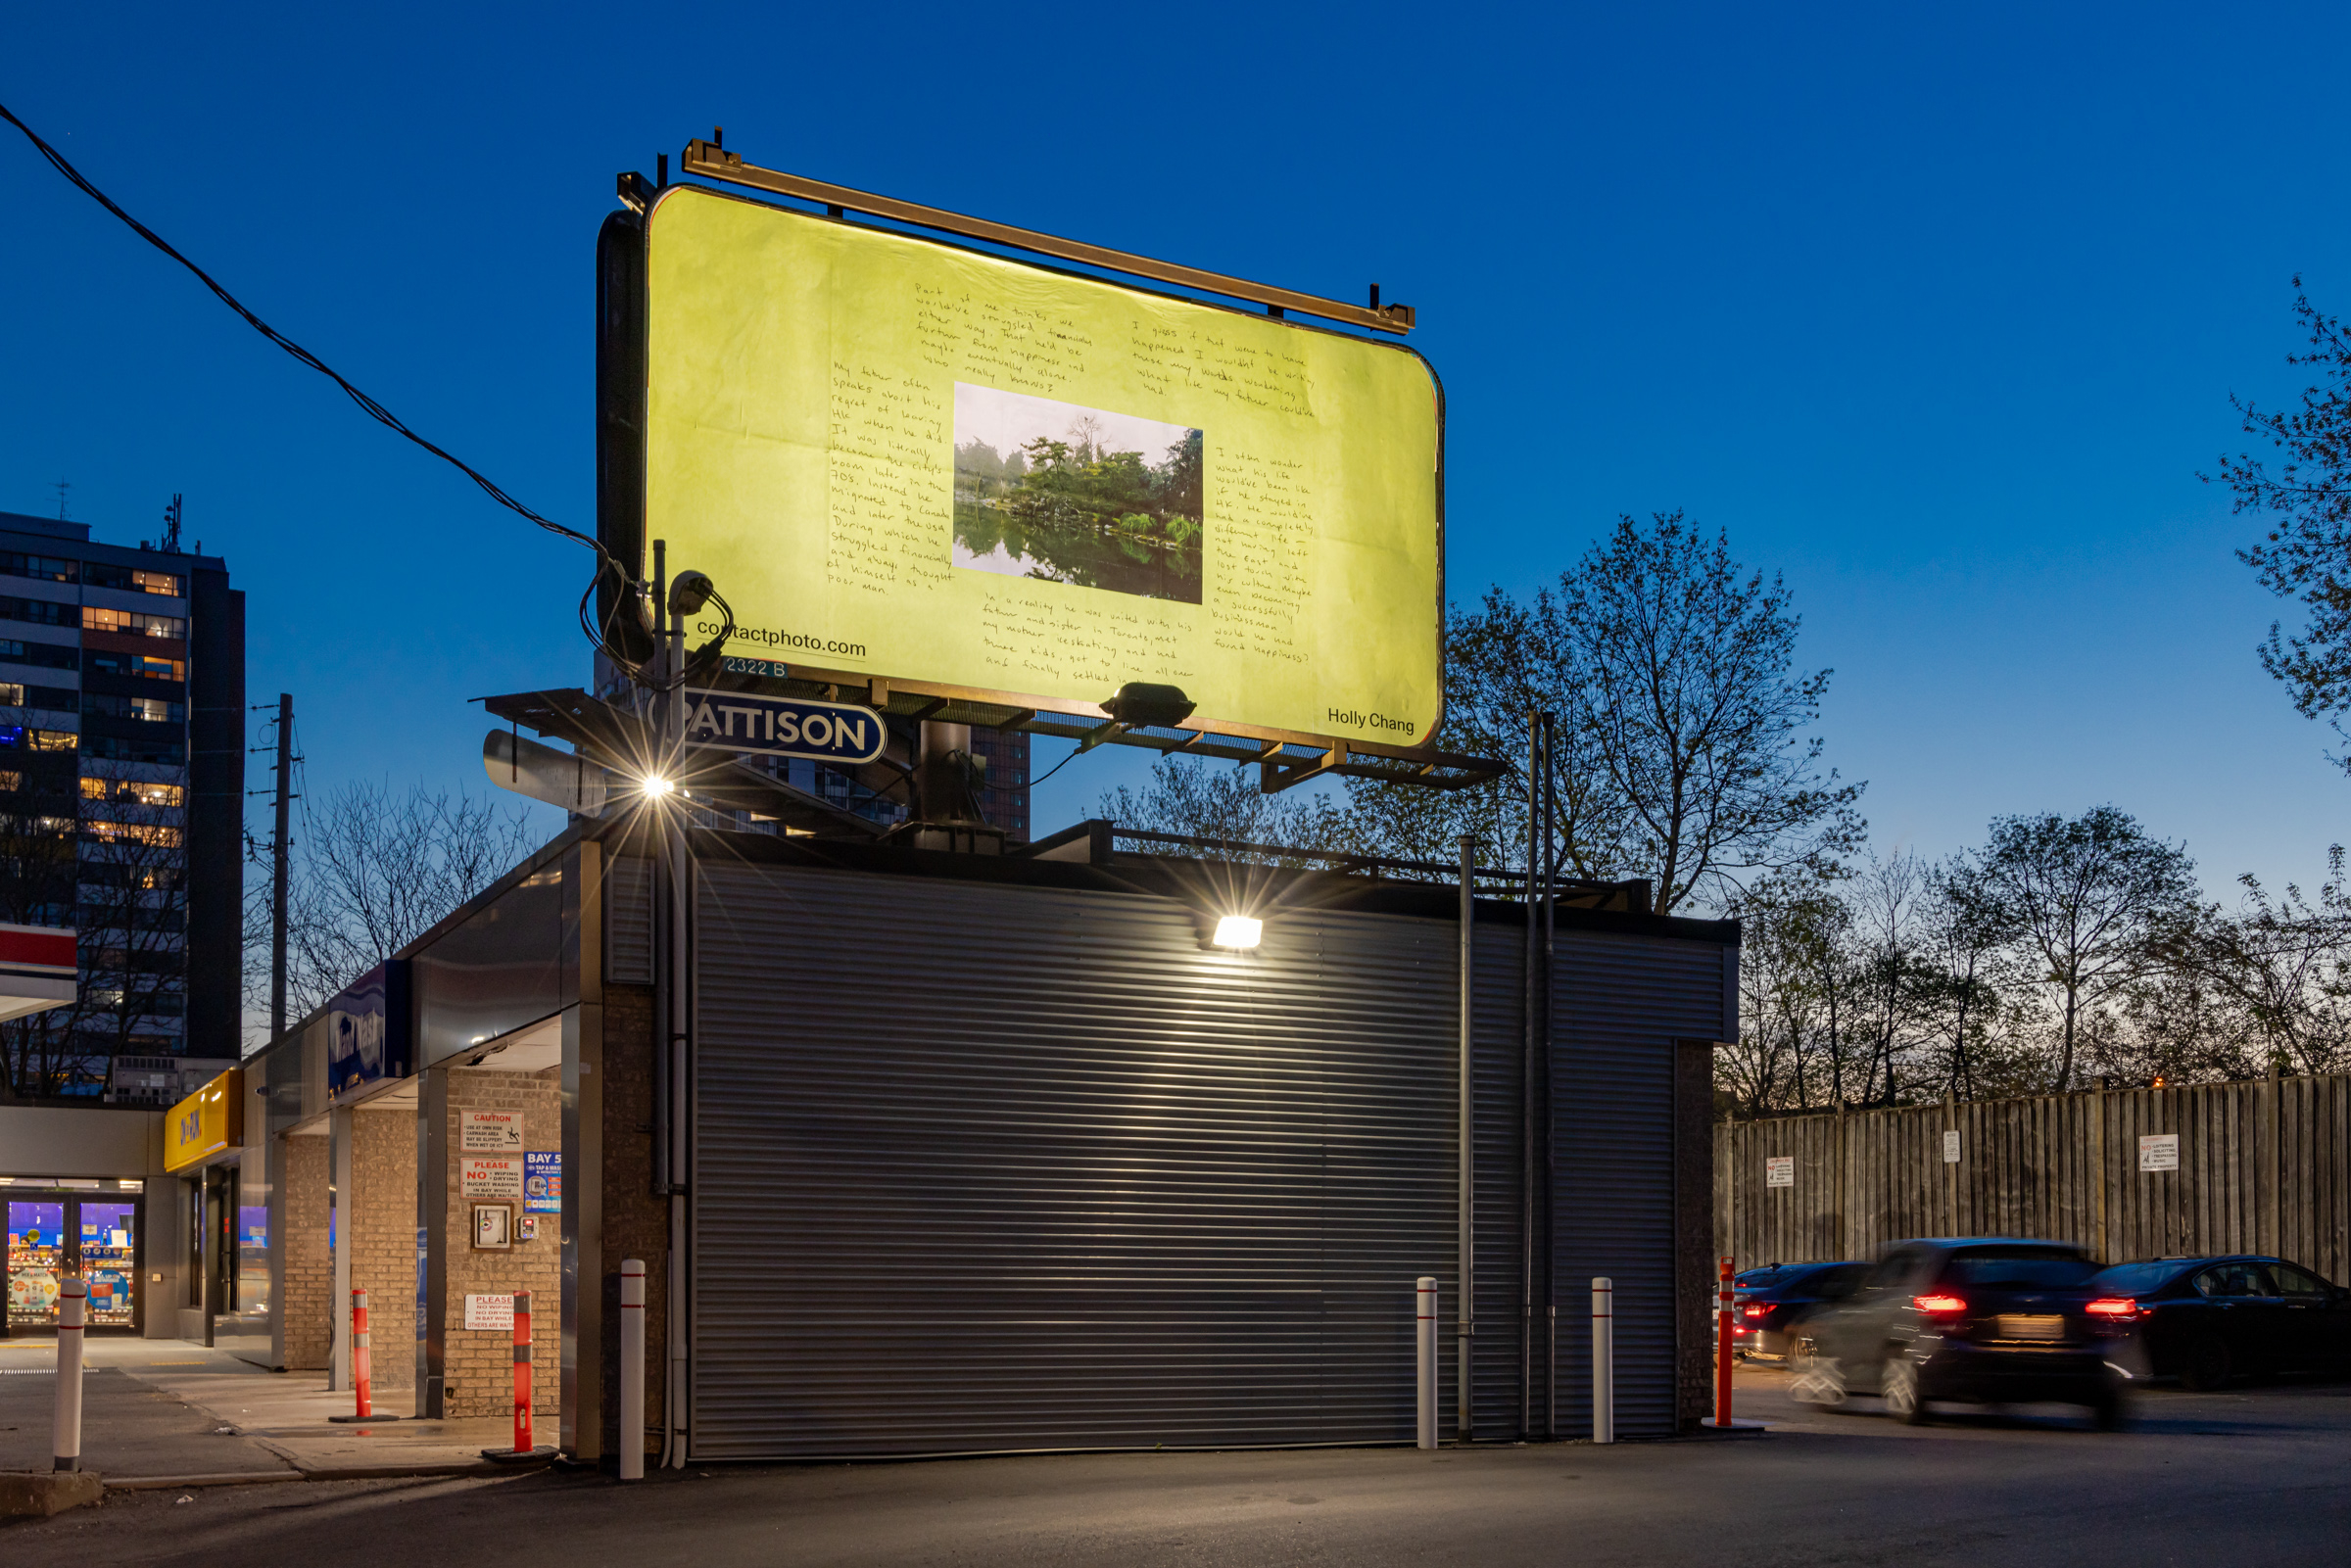     Holly Chang, How to Disappear When No One is Looking, 2024, installation view, billboards at Dupont St and Emerson Ave, Courtesy of the artist and CONTACT Photography Festival. Photo: Toni Hafkenscheid

